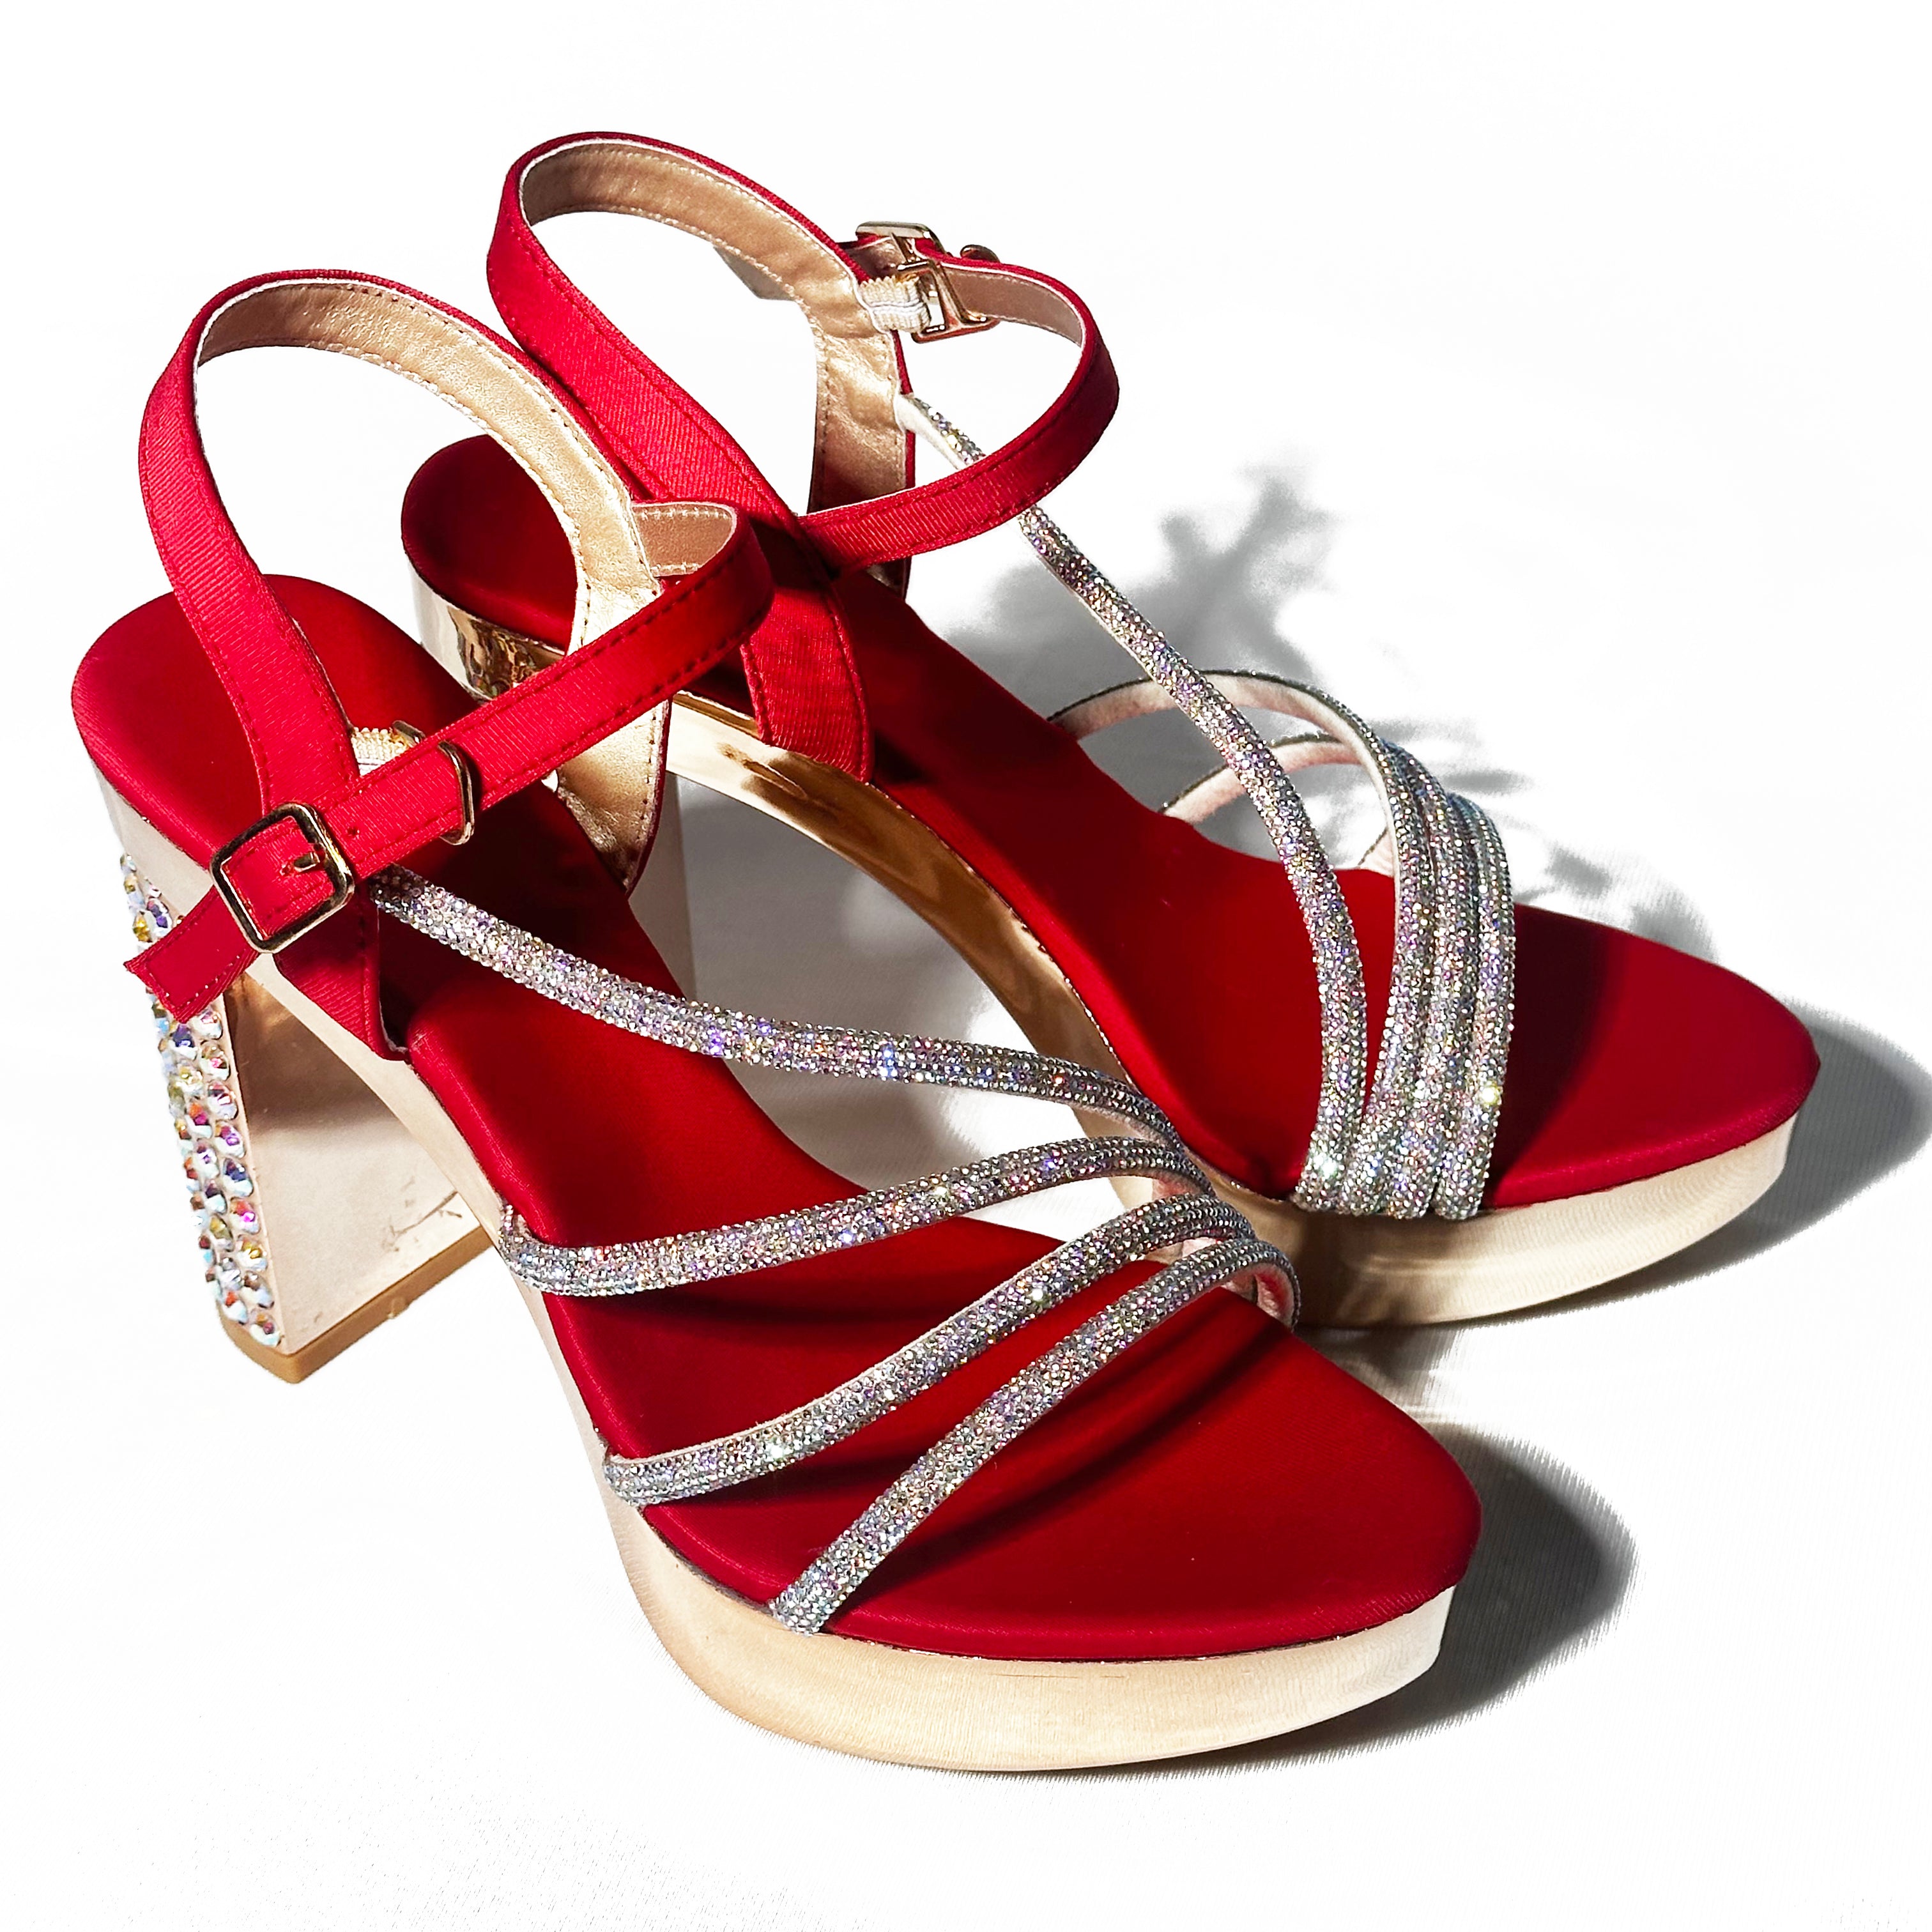 PrettyLittleThing Ruffle Block Heeled Sandals In Red | Lyst